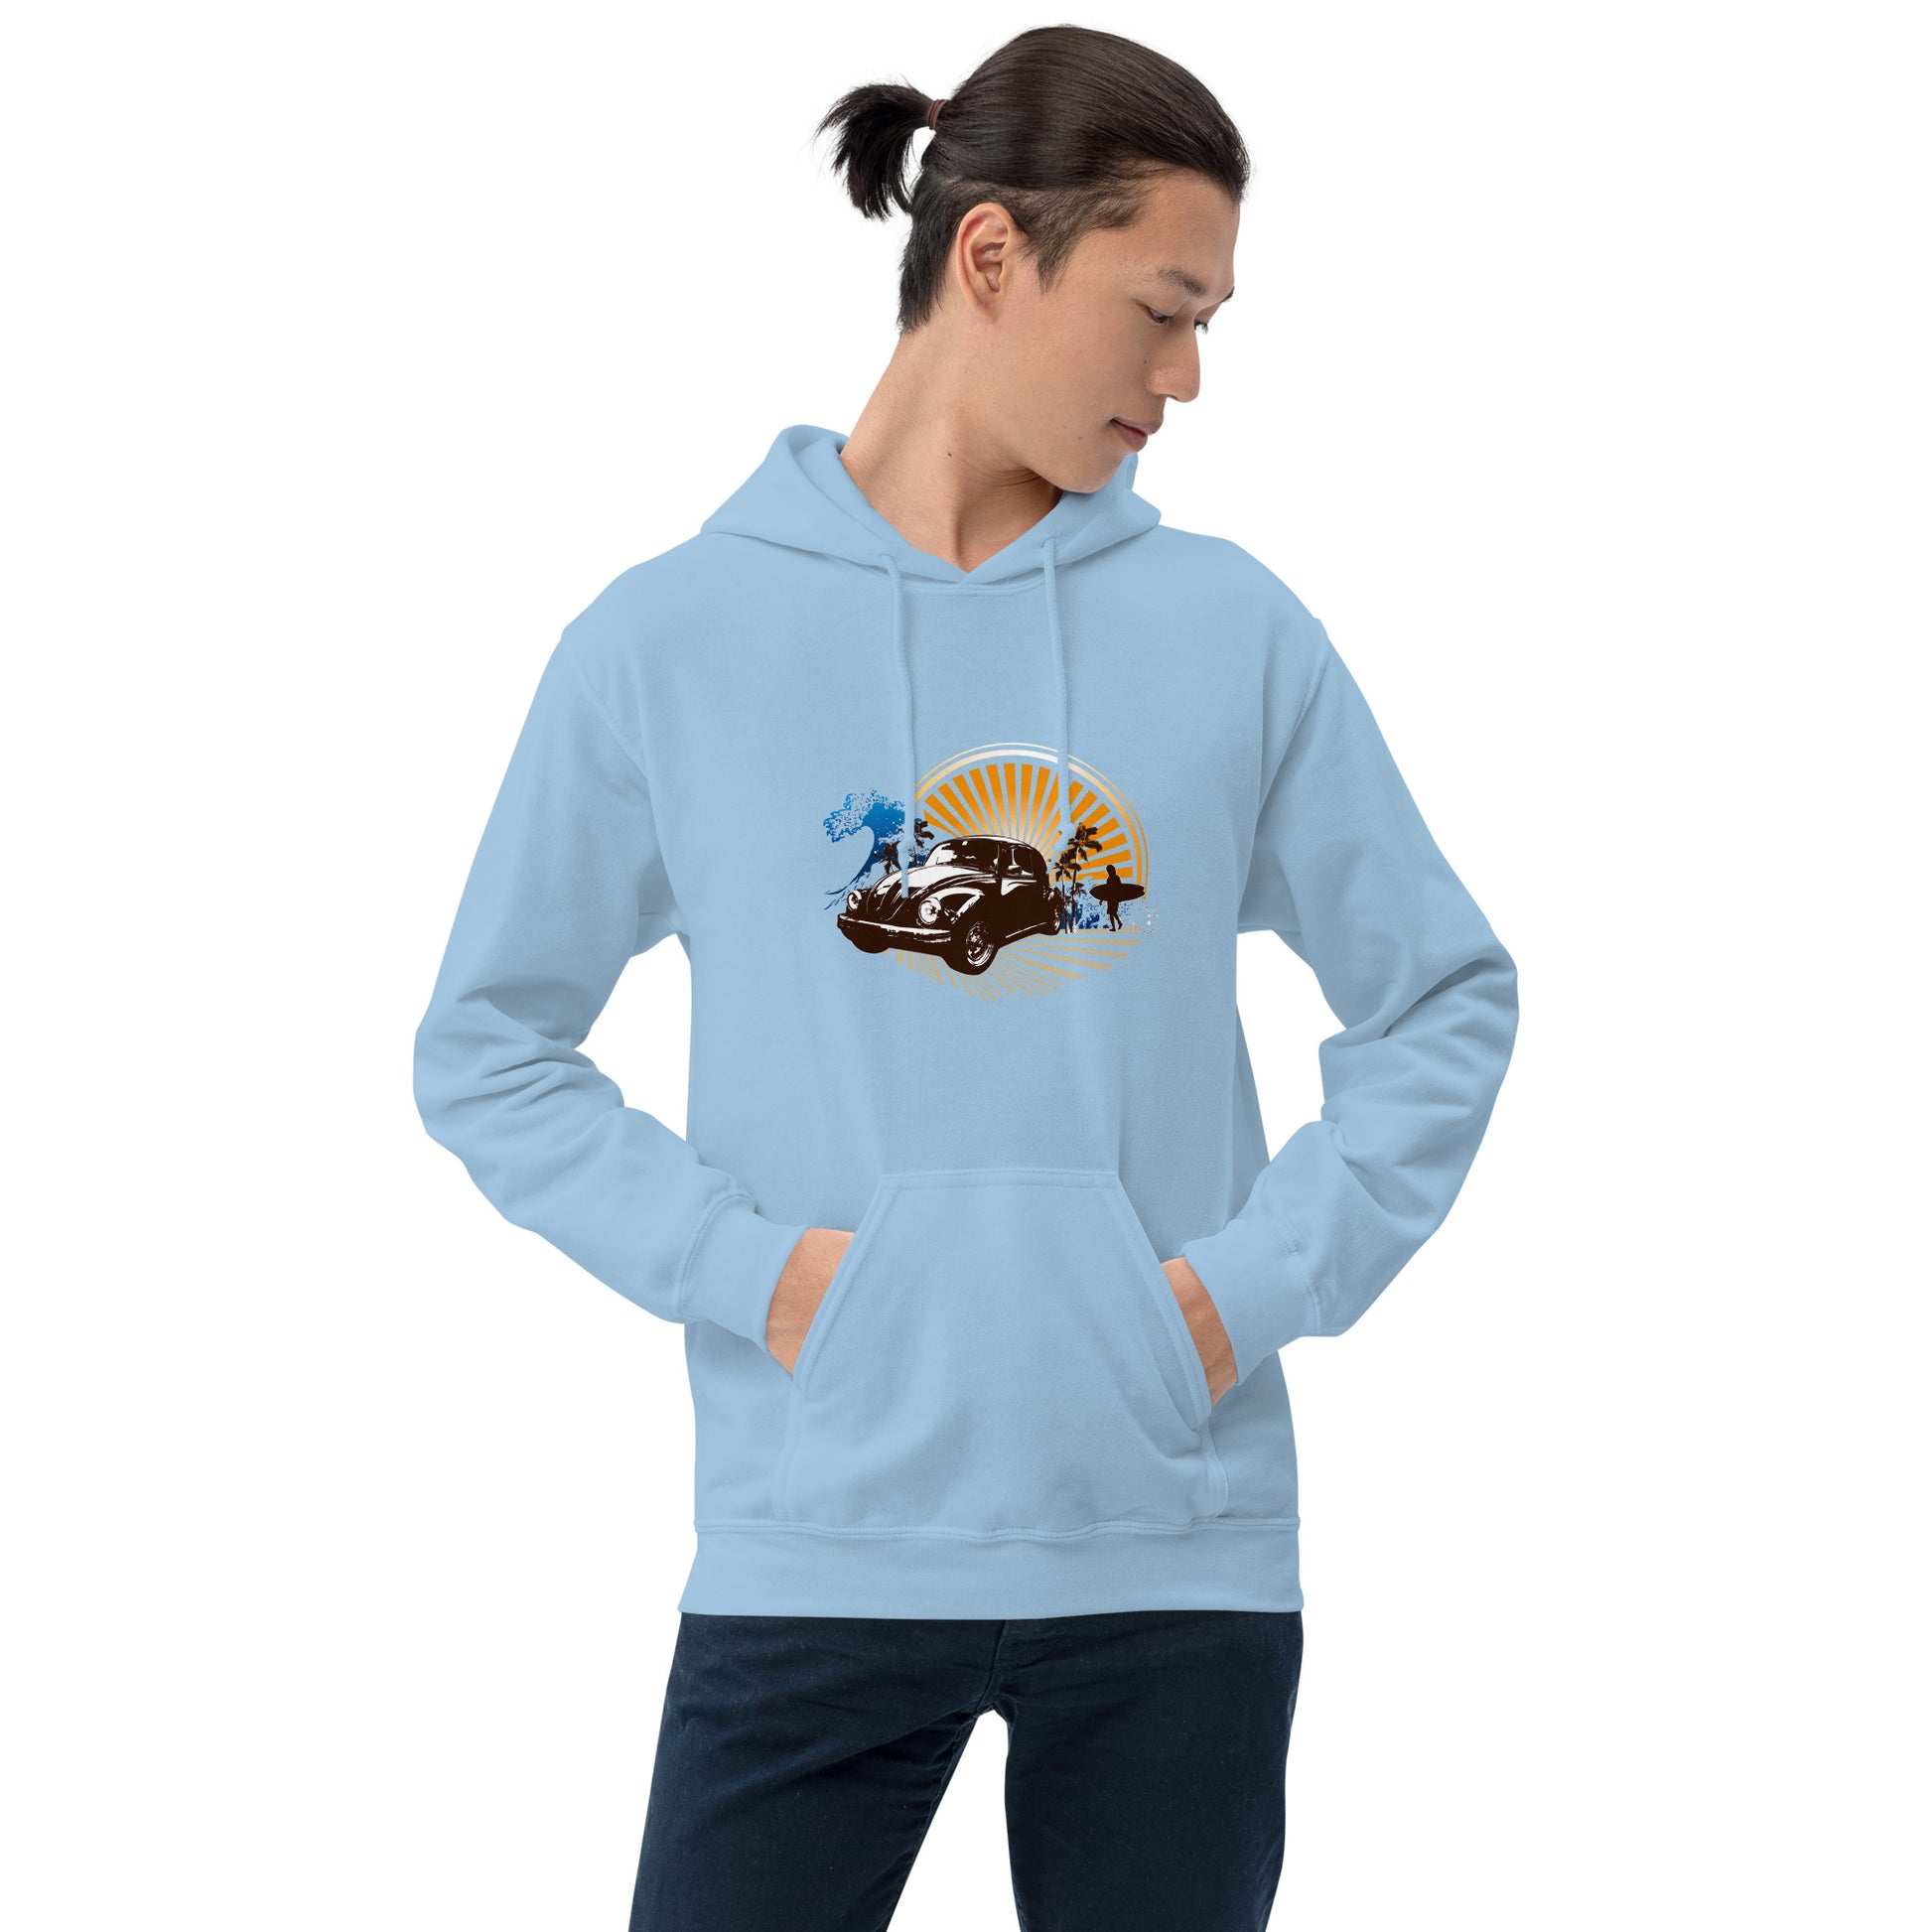 Men with light blue hoodie with sunset and beetle car